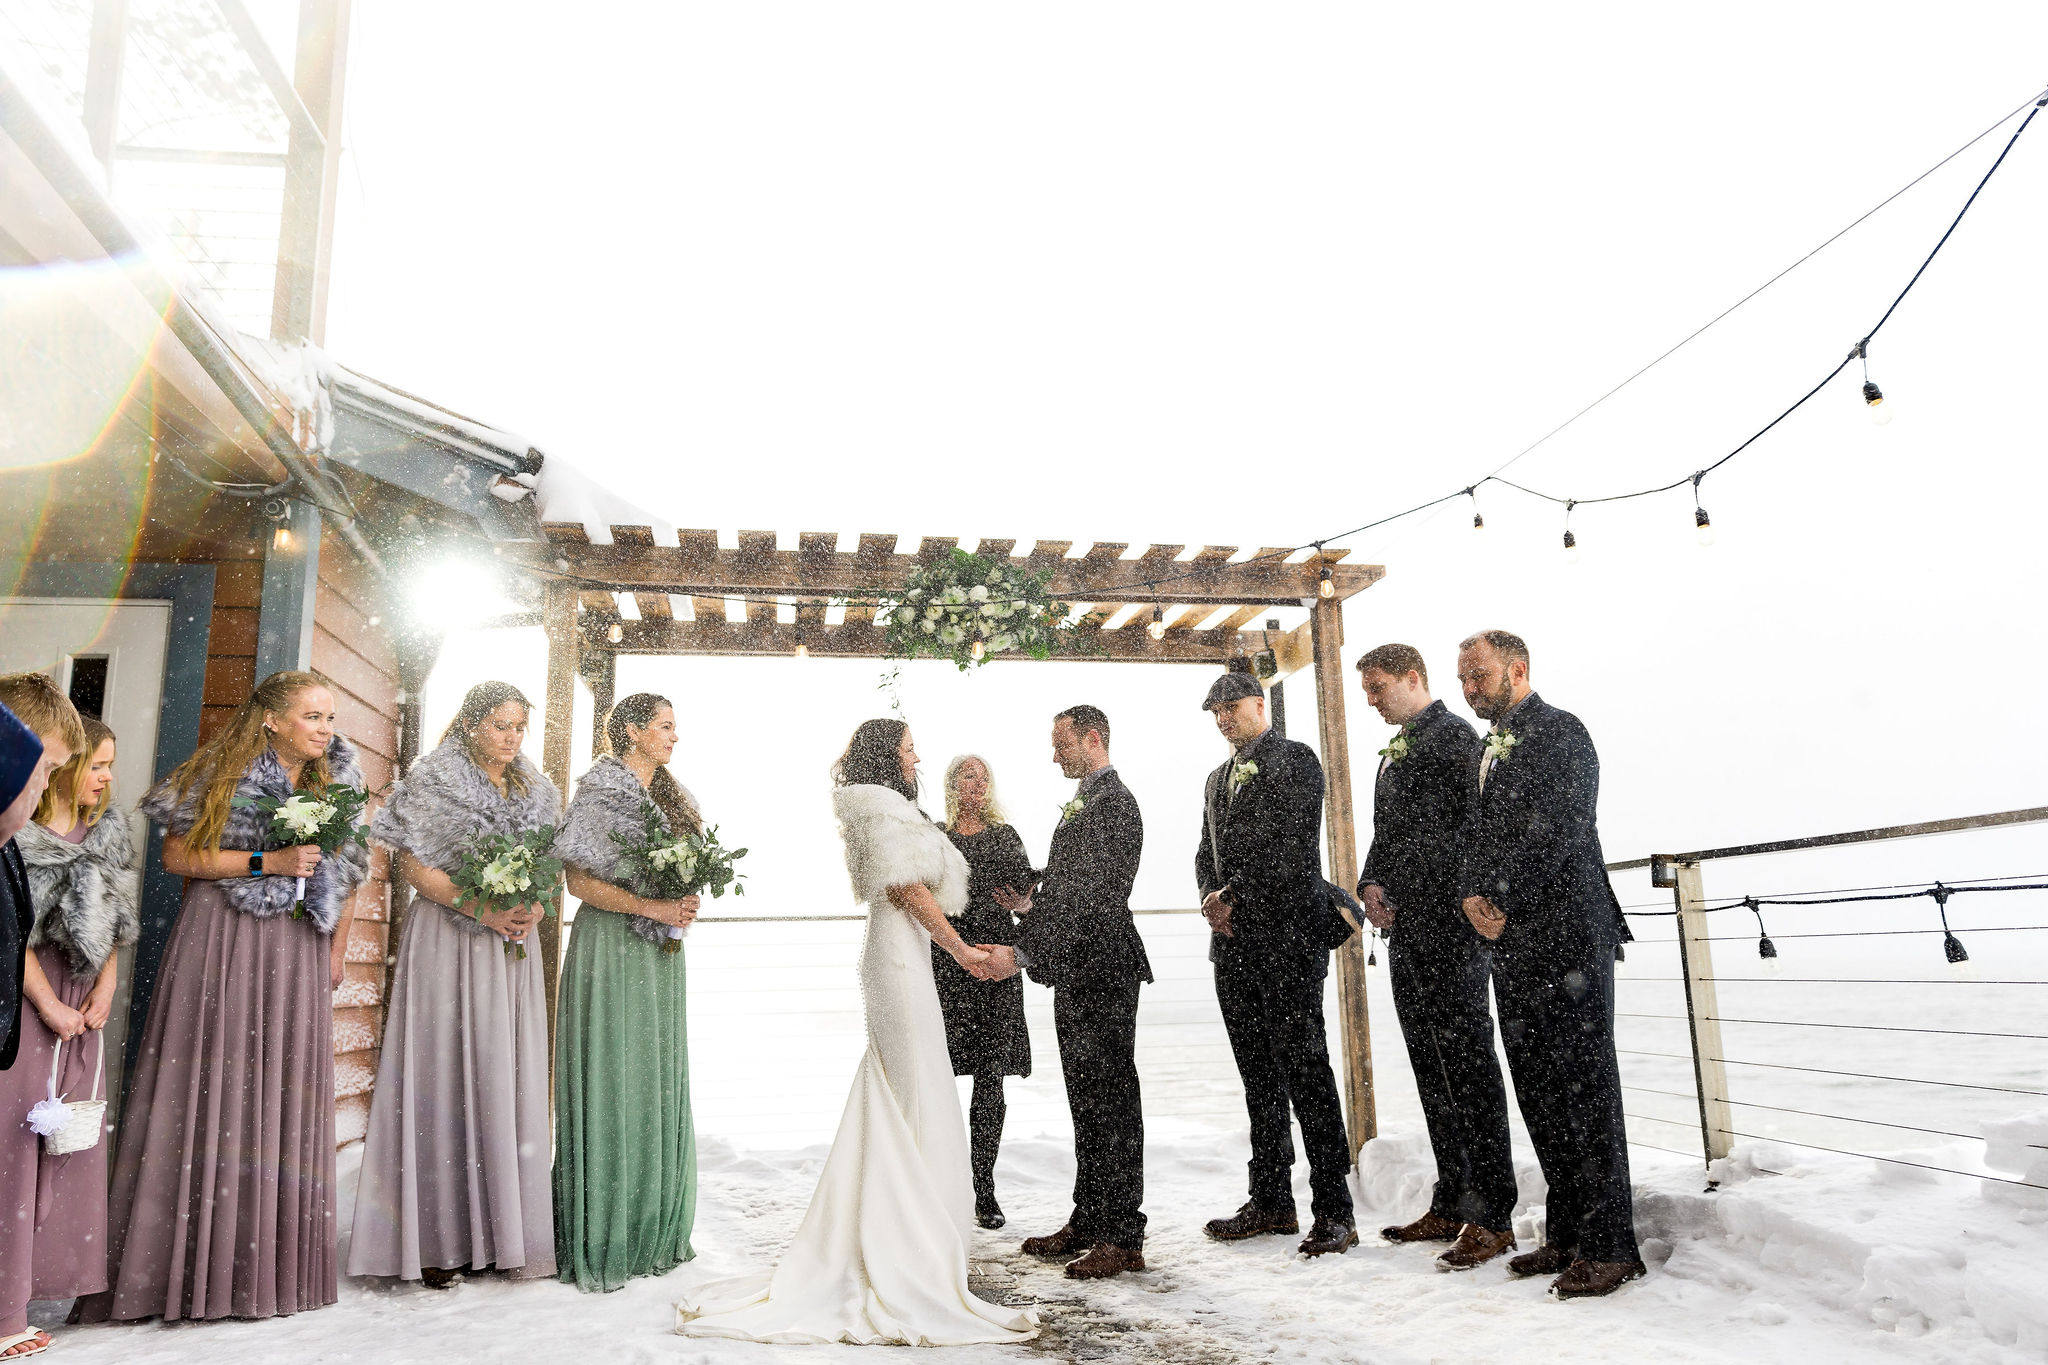 Winter wedding at the Idle Hour on Lake Tahoe